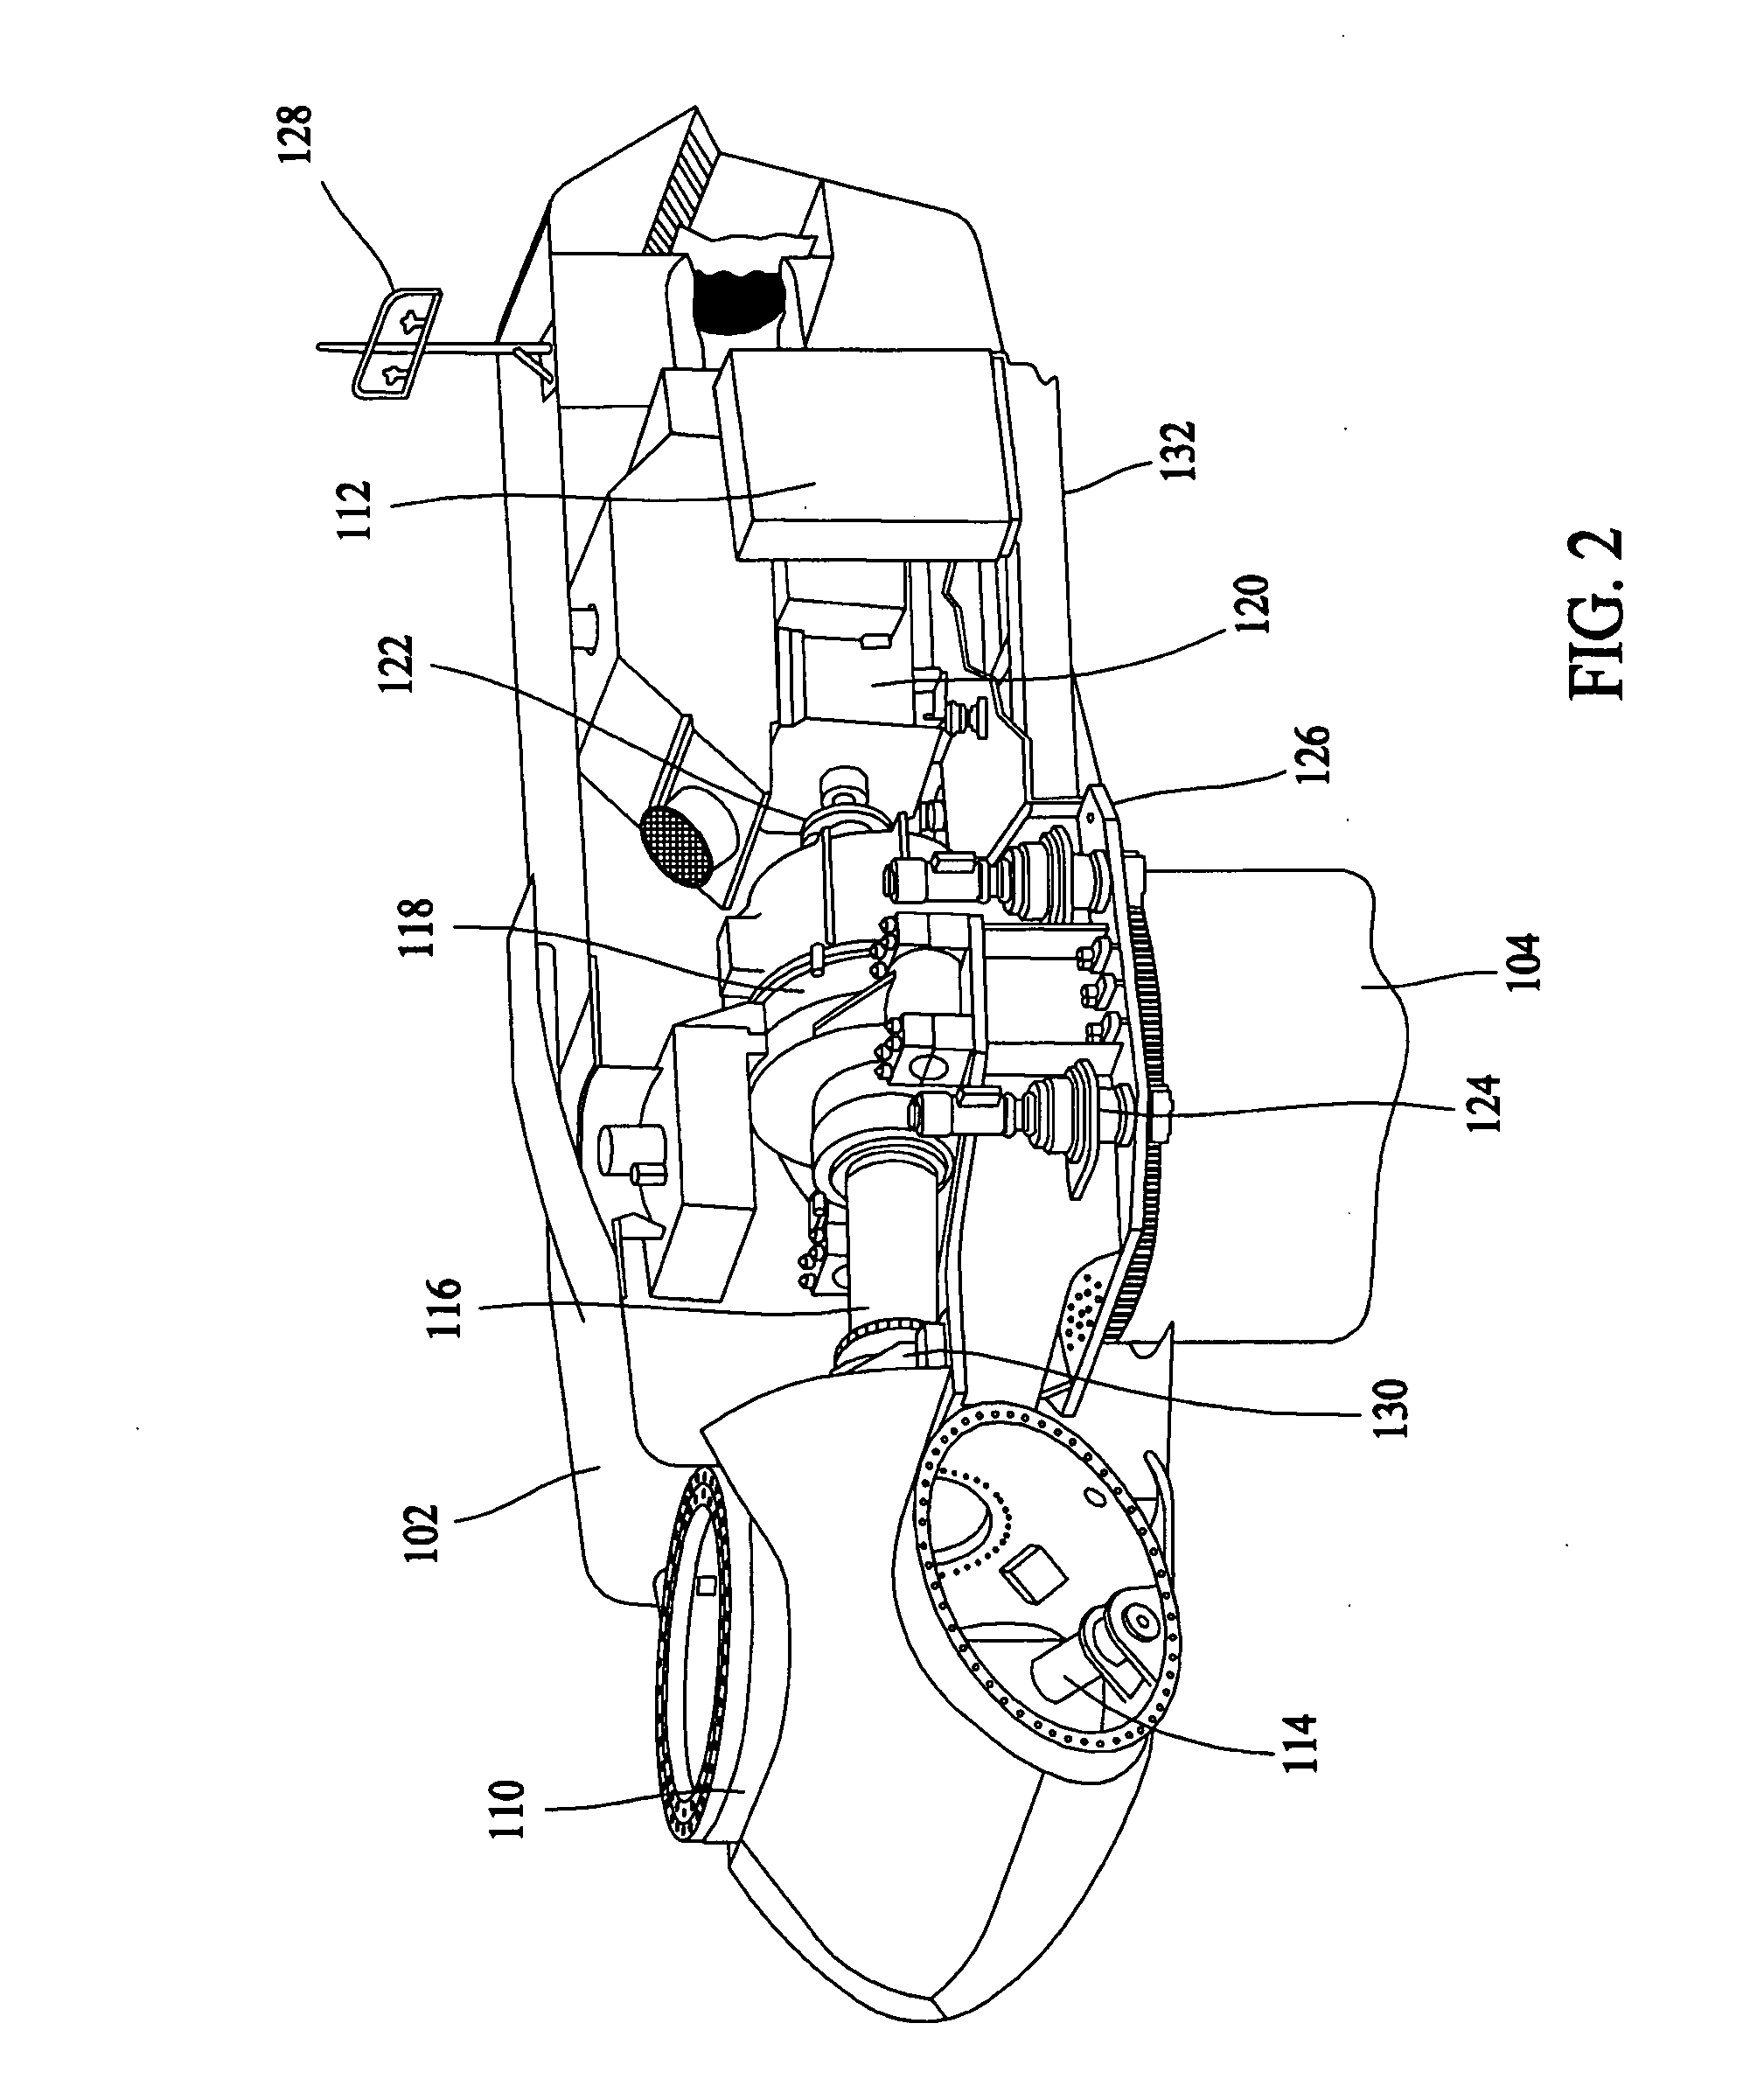 Removable bearing arrangement for a wind turbine generator